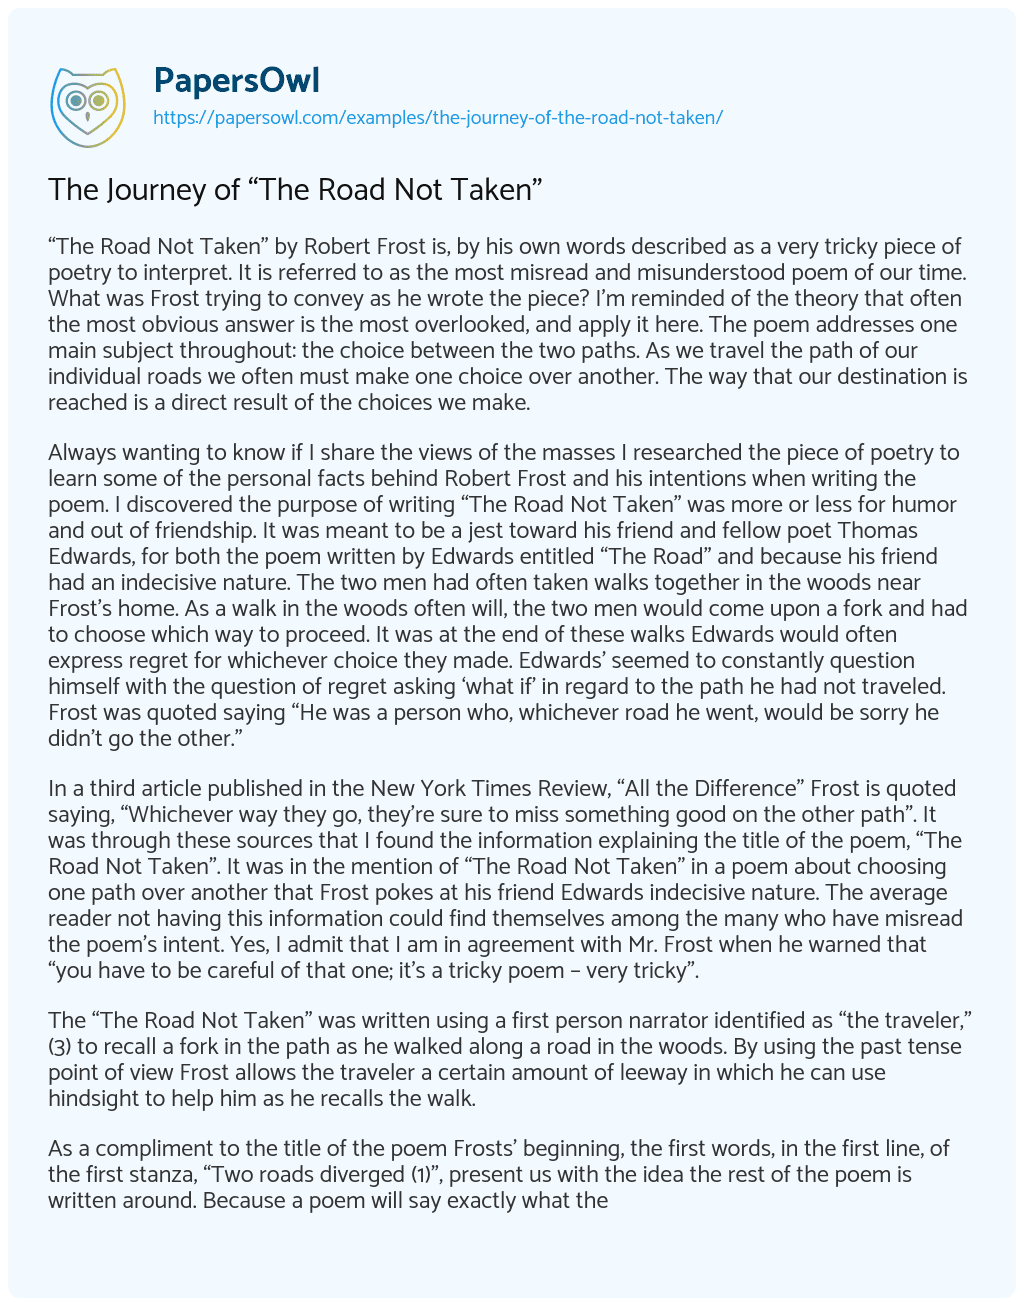 The Journey of “The Road not Taken” essay